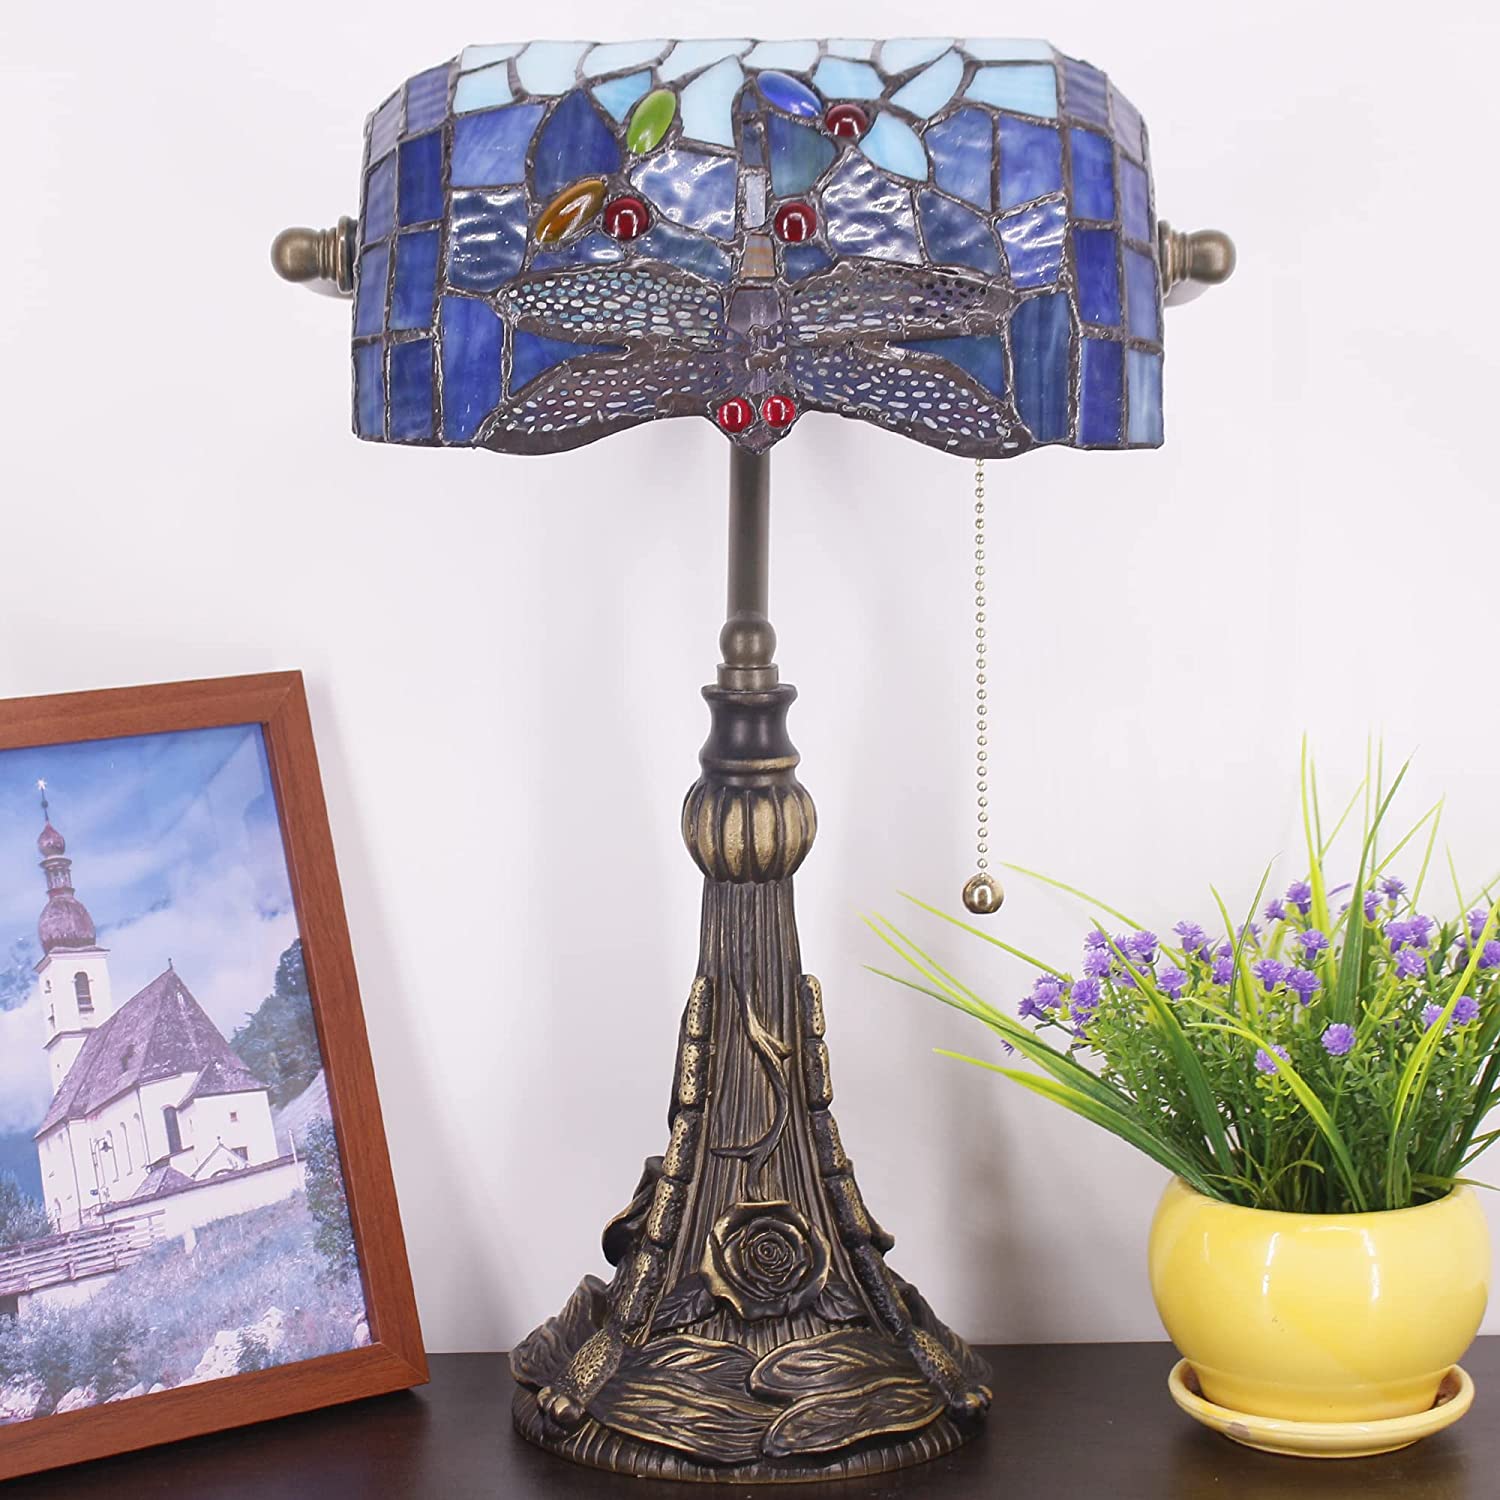 Werfactory® Banker Lamp Tiffany Desk Lamp Blue Dragonfly Style Stained Glass Table Lamp, Adjustable Luxury Memory Piano Lamp 15" Tall